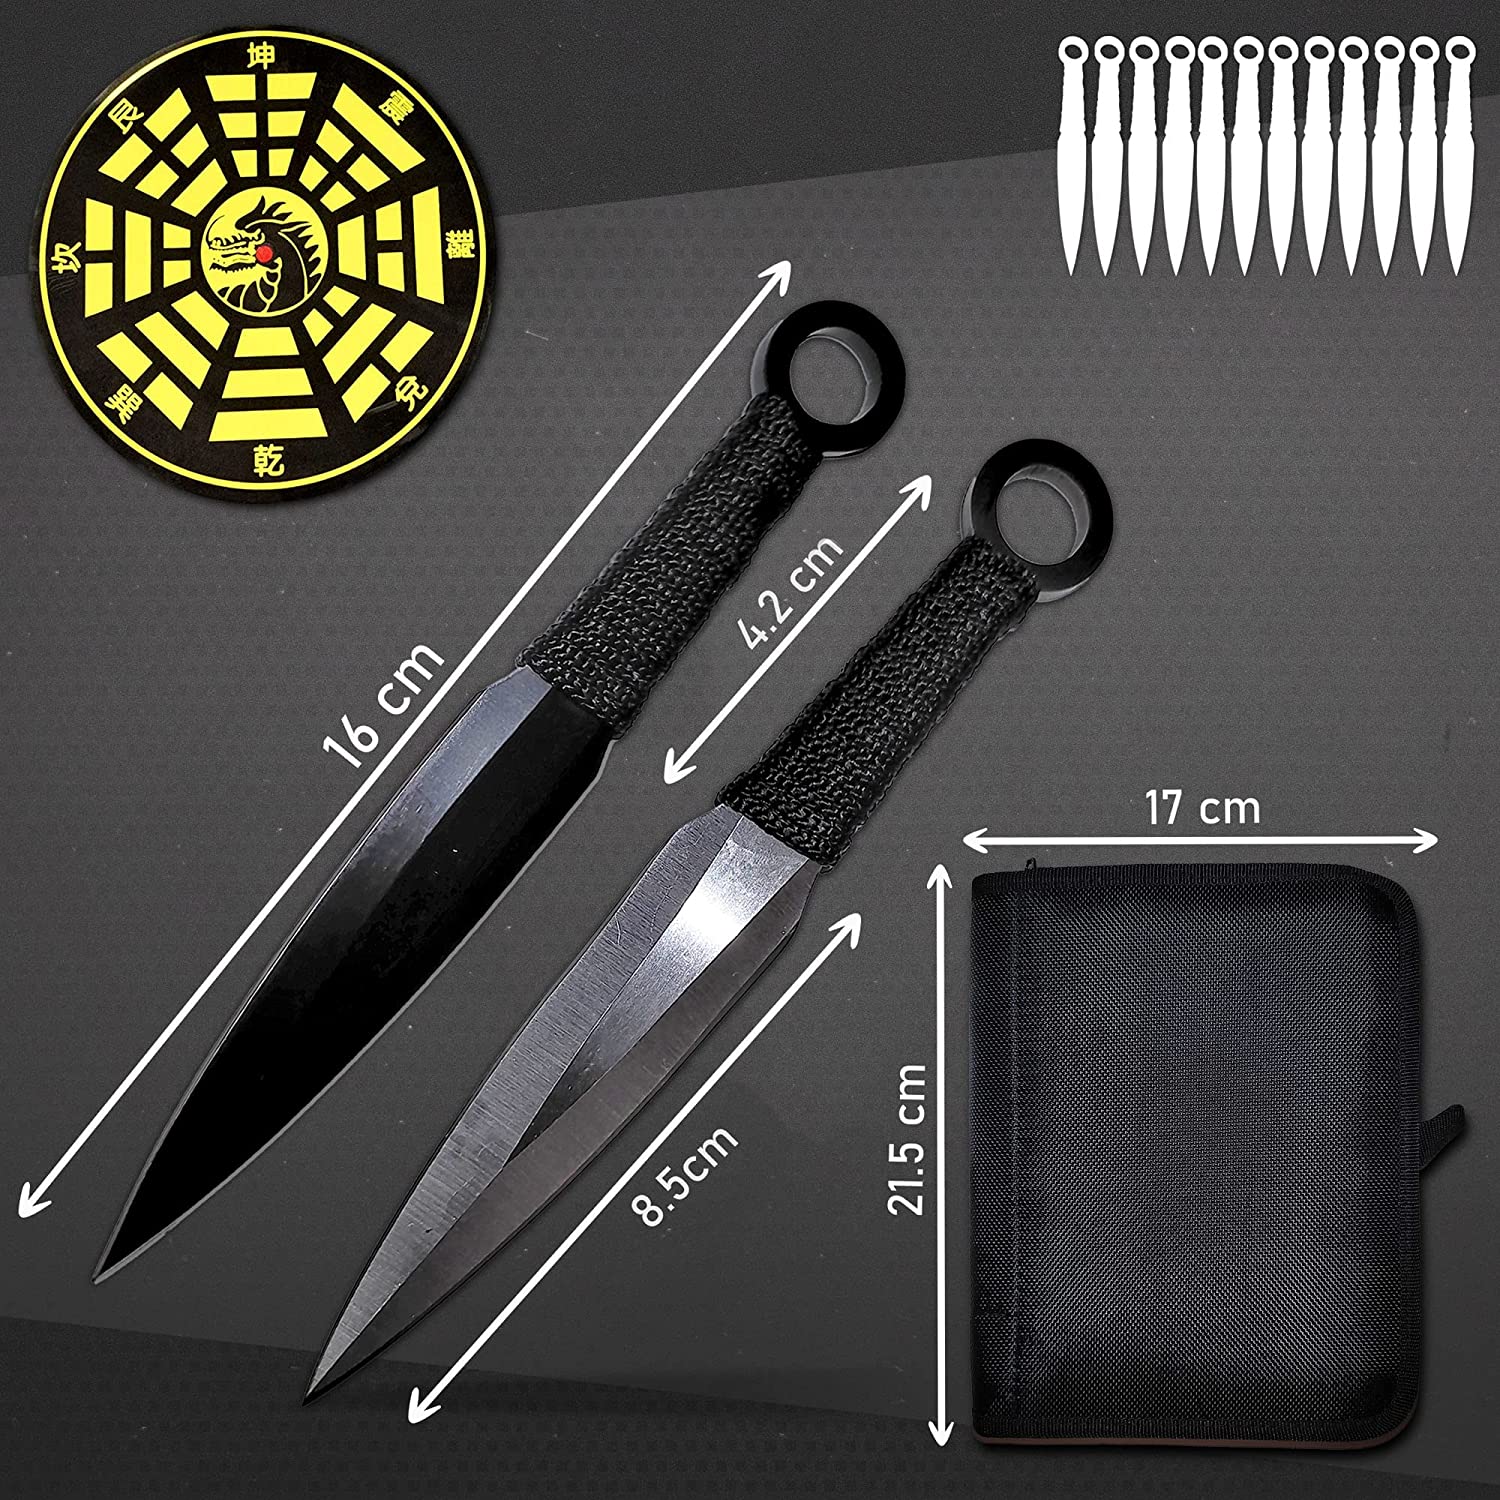 12 black and silver throwing knives with target